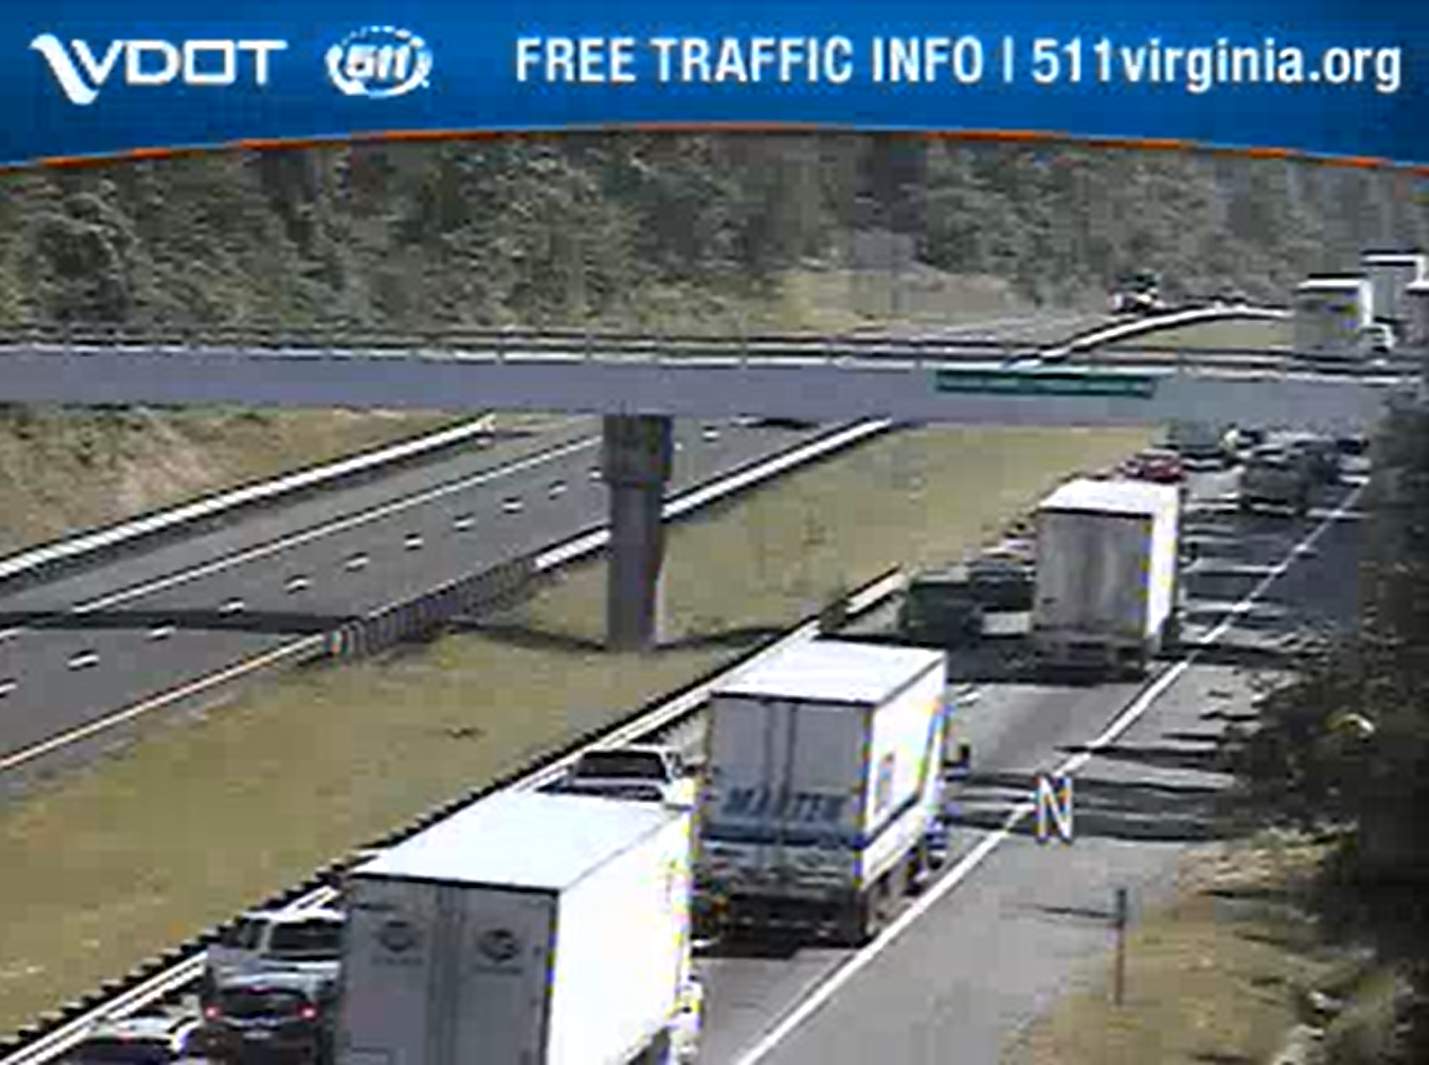 One lane closed NB on I-81 in Botetourt Co. due to car fire